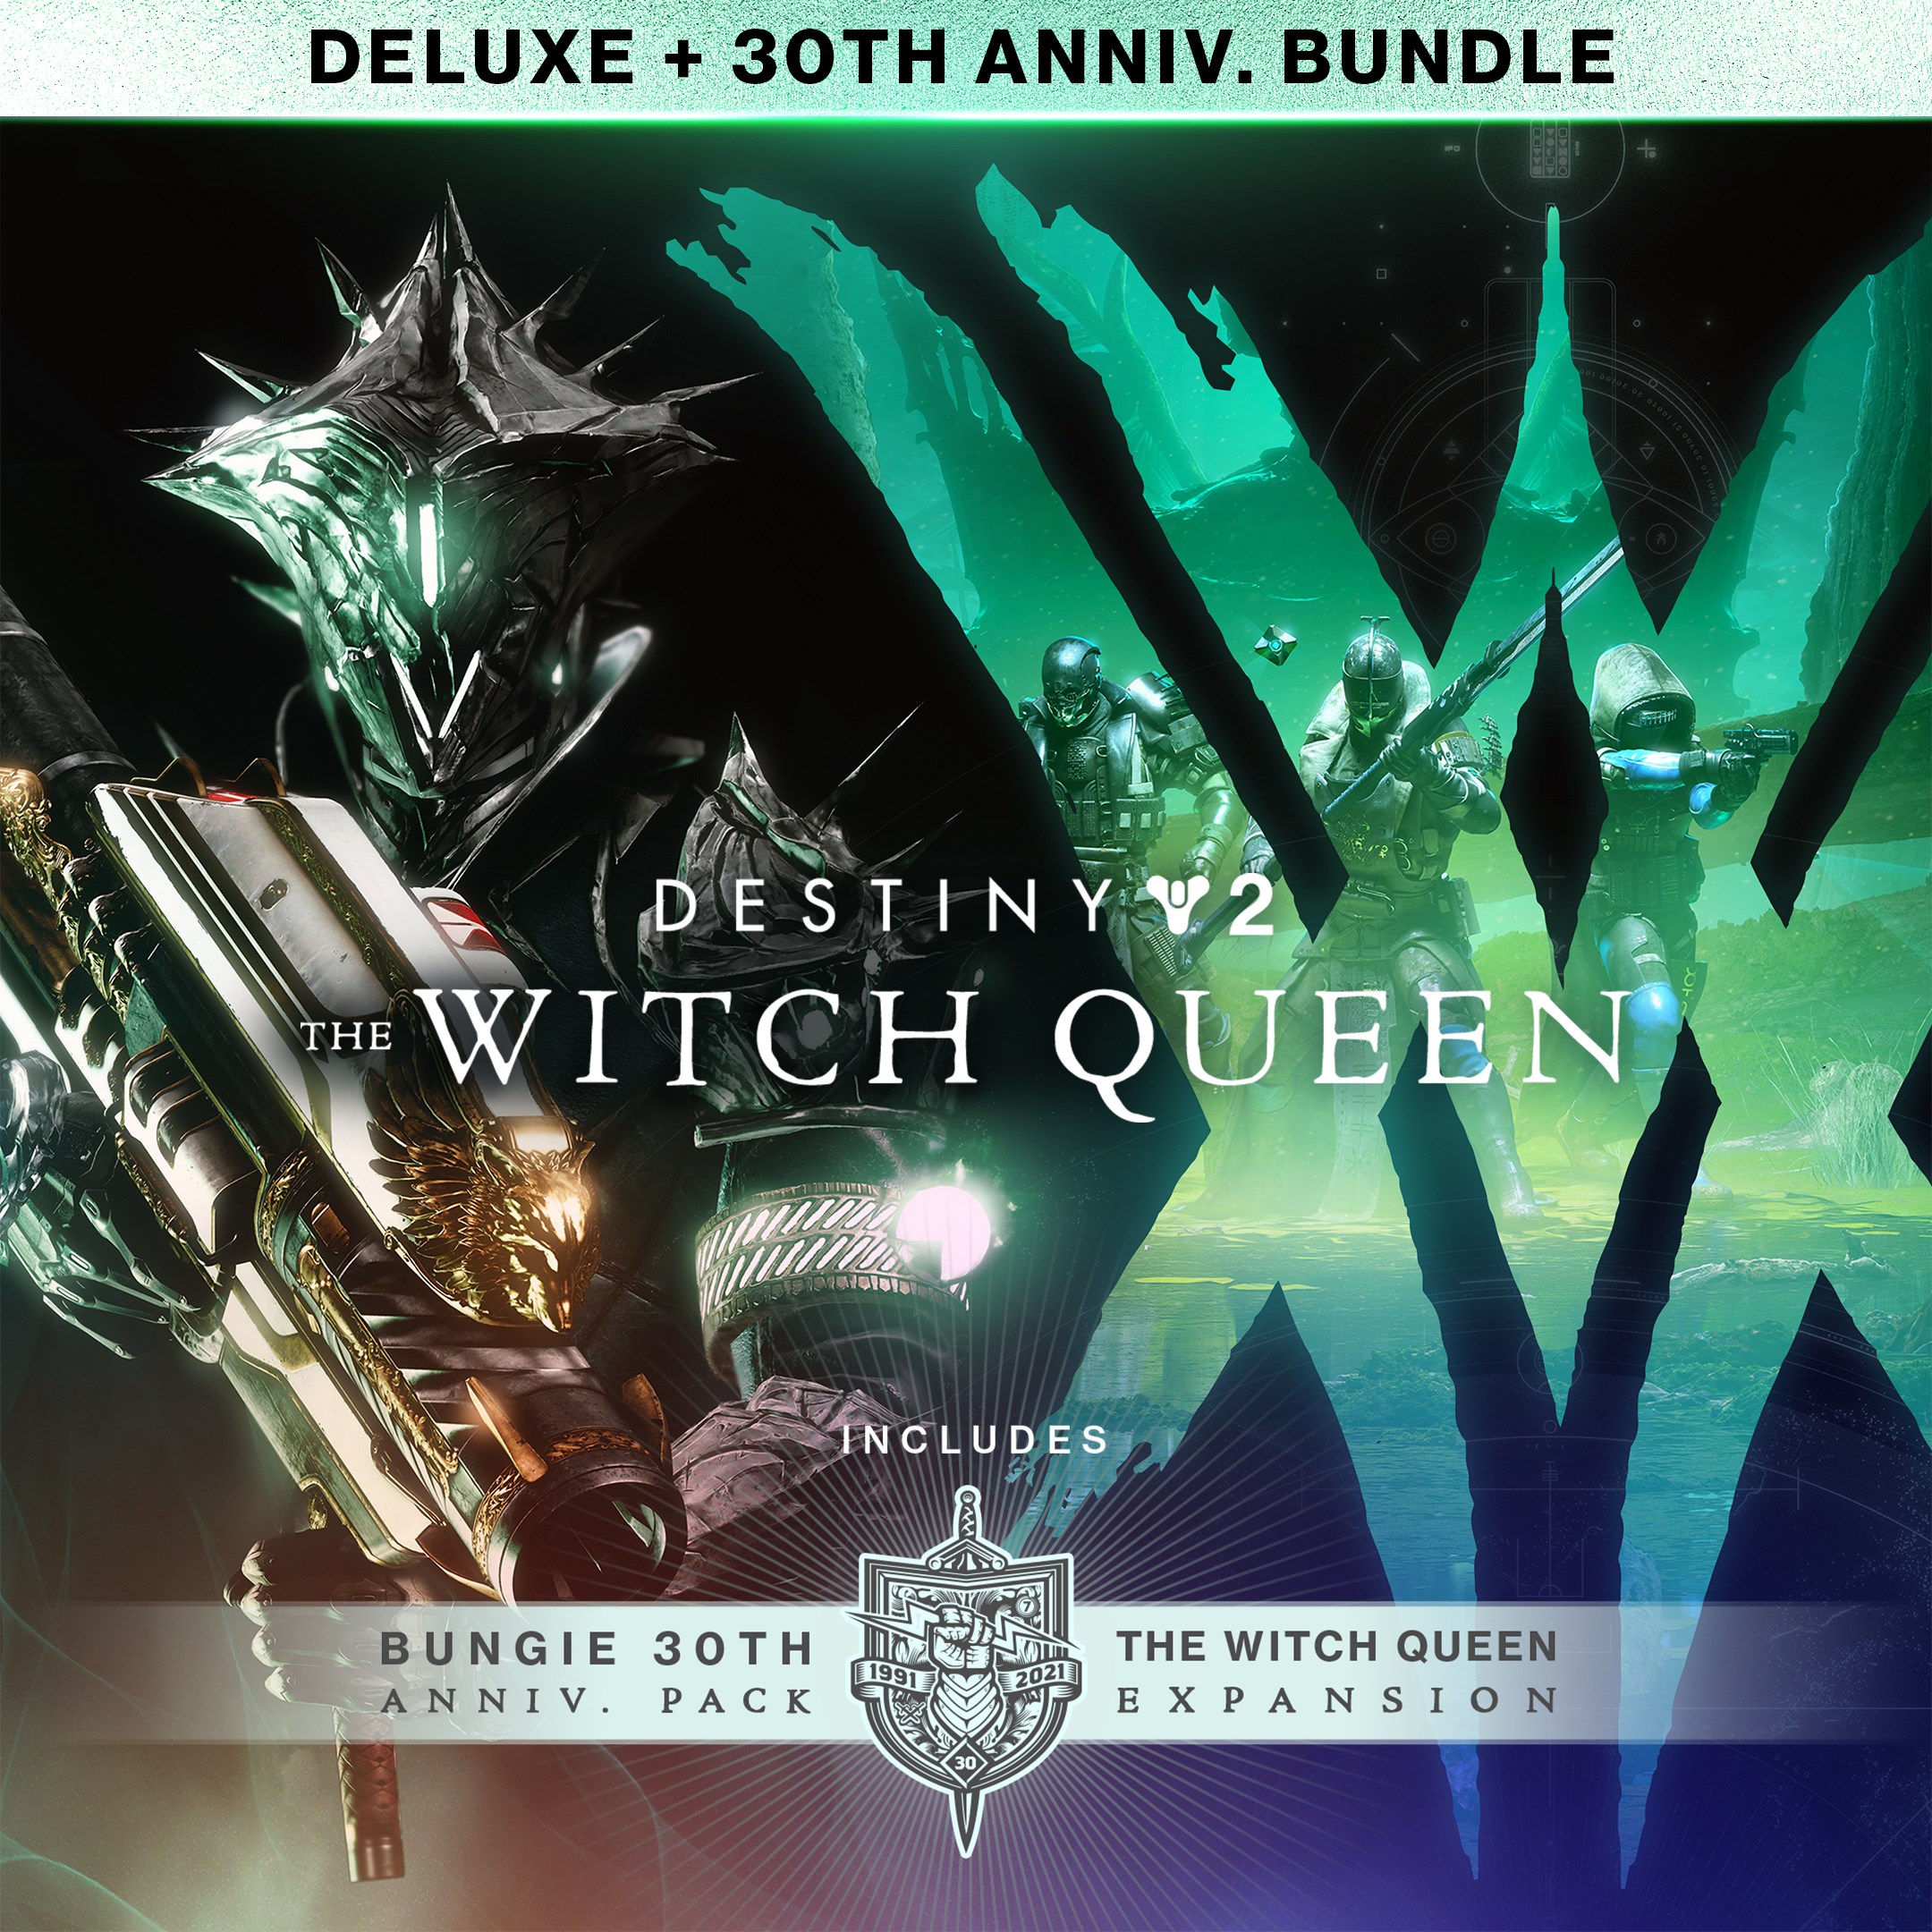 Destiny 2 The Witch Queen Deluxe + Bungie 30th Anniversary Bundle PC